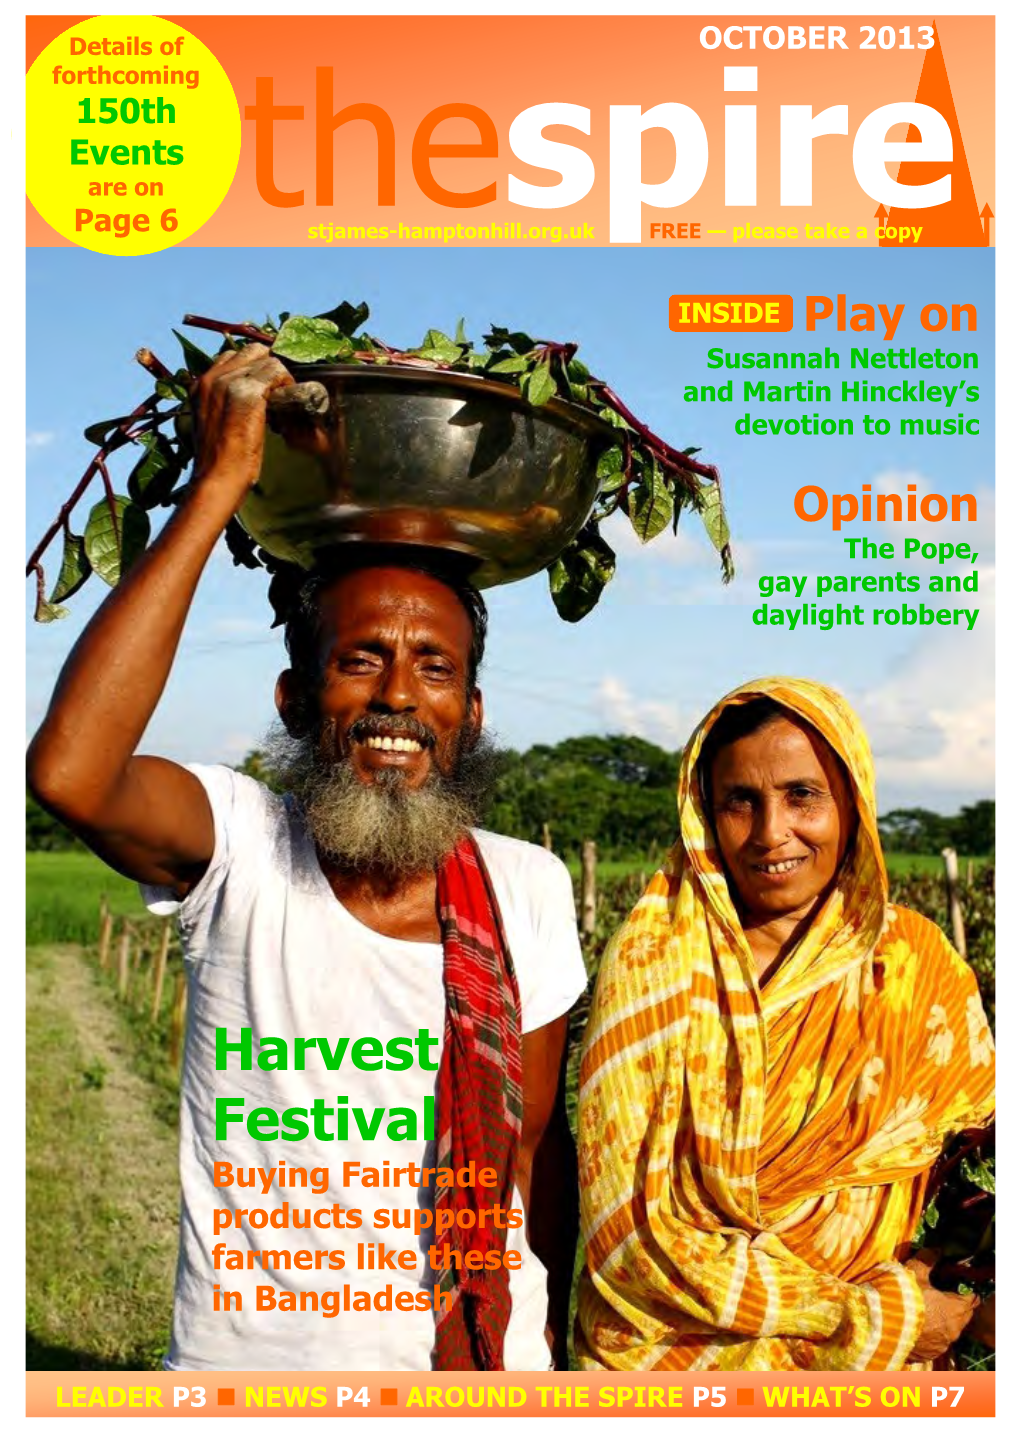 Harvest Festival Buying Fairtrade Products Supports Farmers Like These in Bangladesh